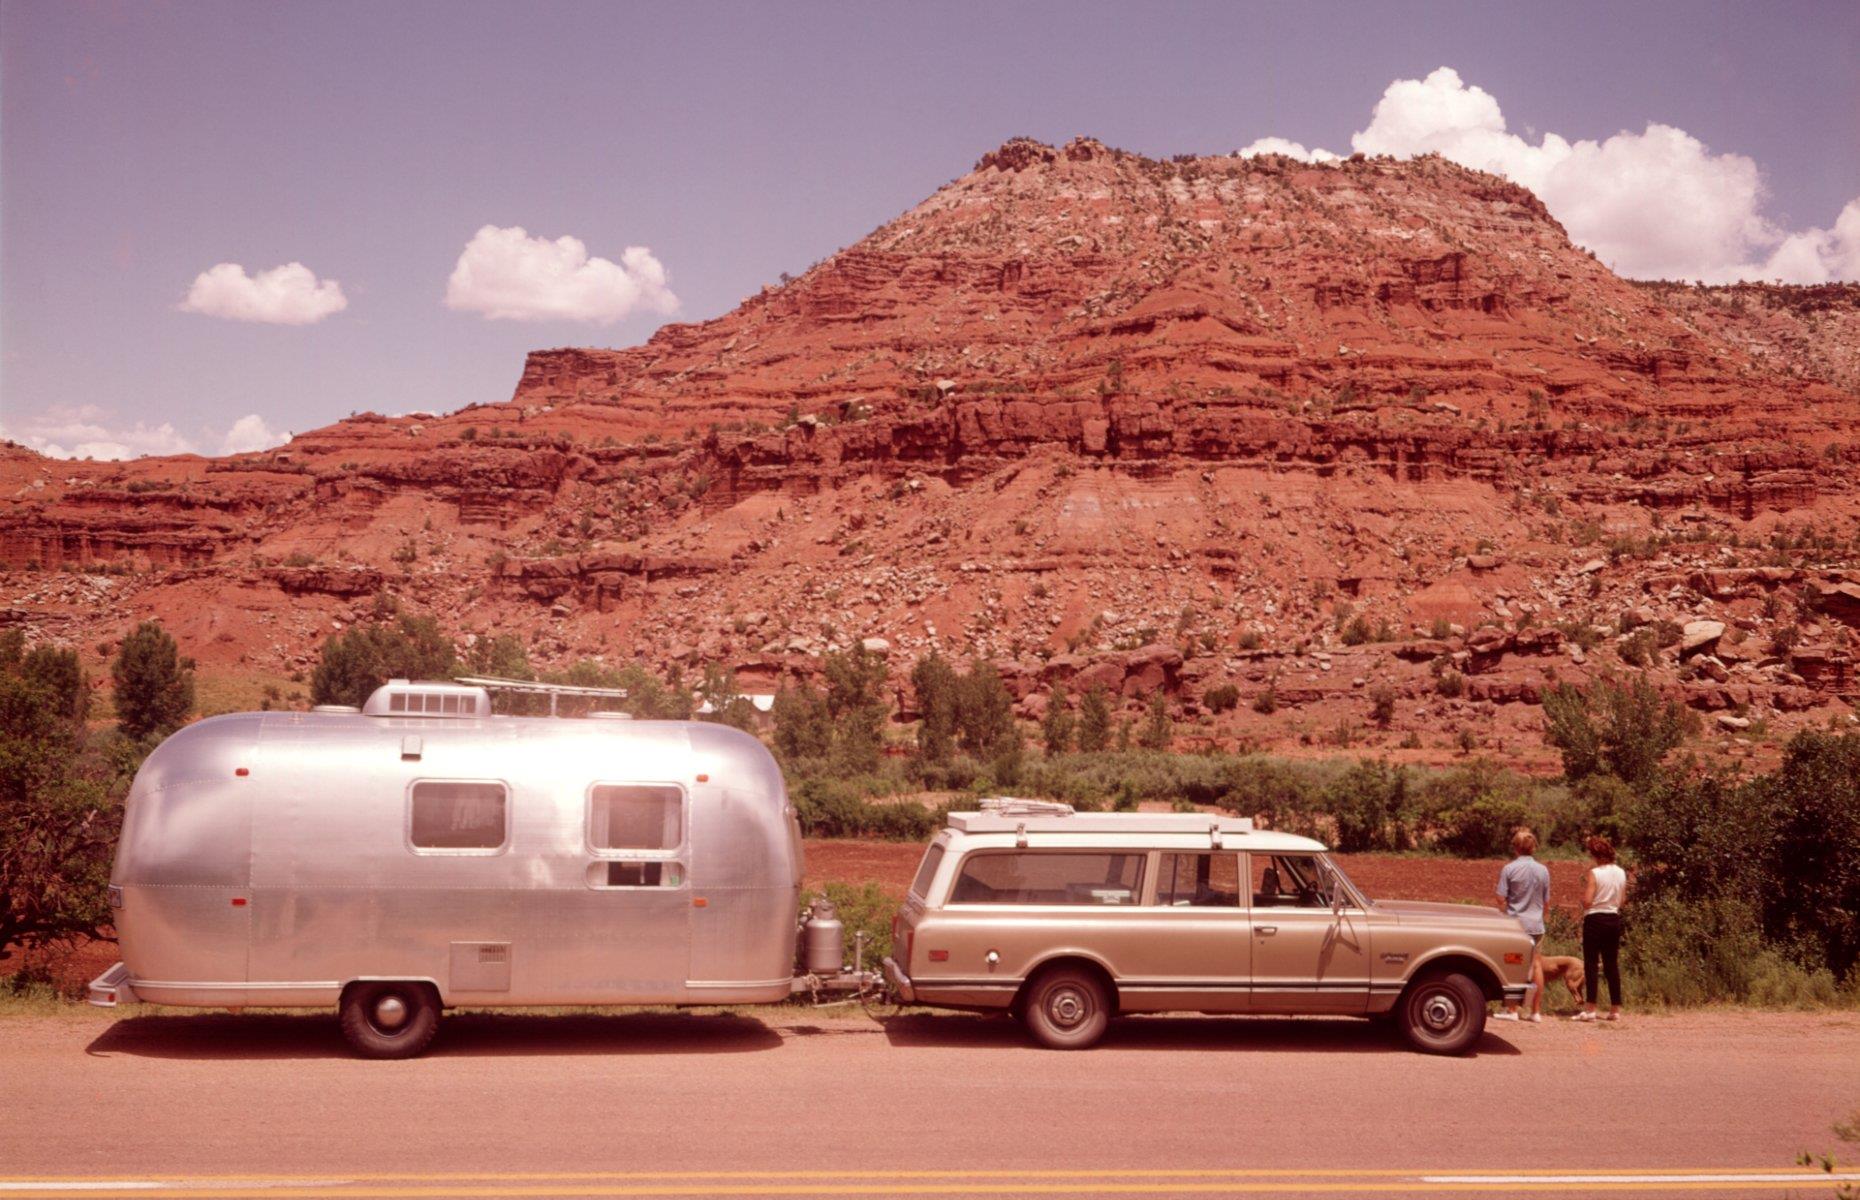 Trailer ownership waned in the late 1970s due to the recession and gas crisis, so much so that Airstream changed tack and released a motorhome for the first time. But its famous trailers remained in use. In this image from the decade, a couple gaze at New Mexico’s stunning mesa formations on a road trip, their Airstream attached to the back of a classic station wagon.